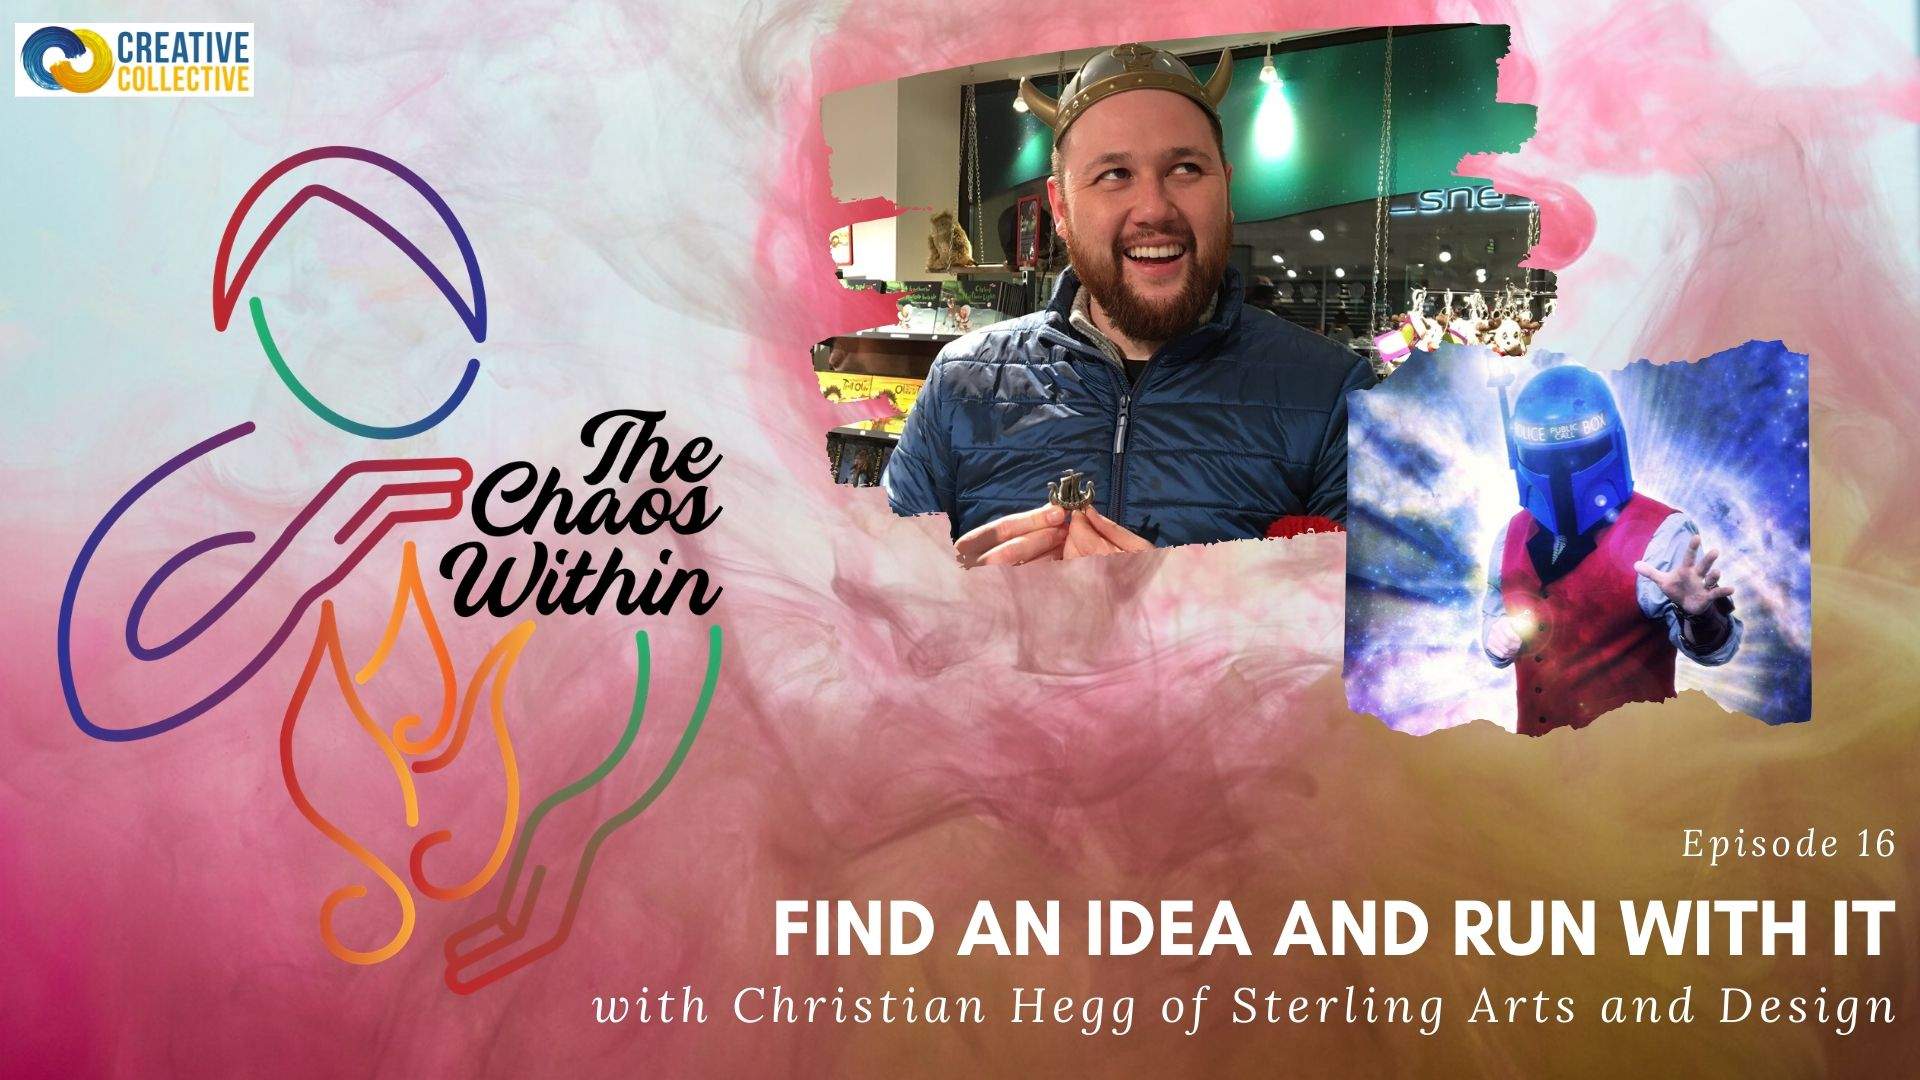 Featured image for “The Chaos Within – Find an Idea and Run with It with Christian Hegg”